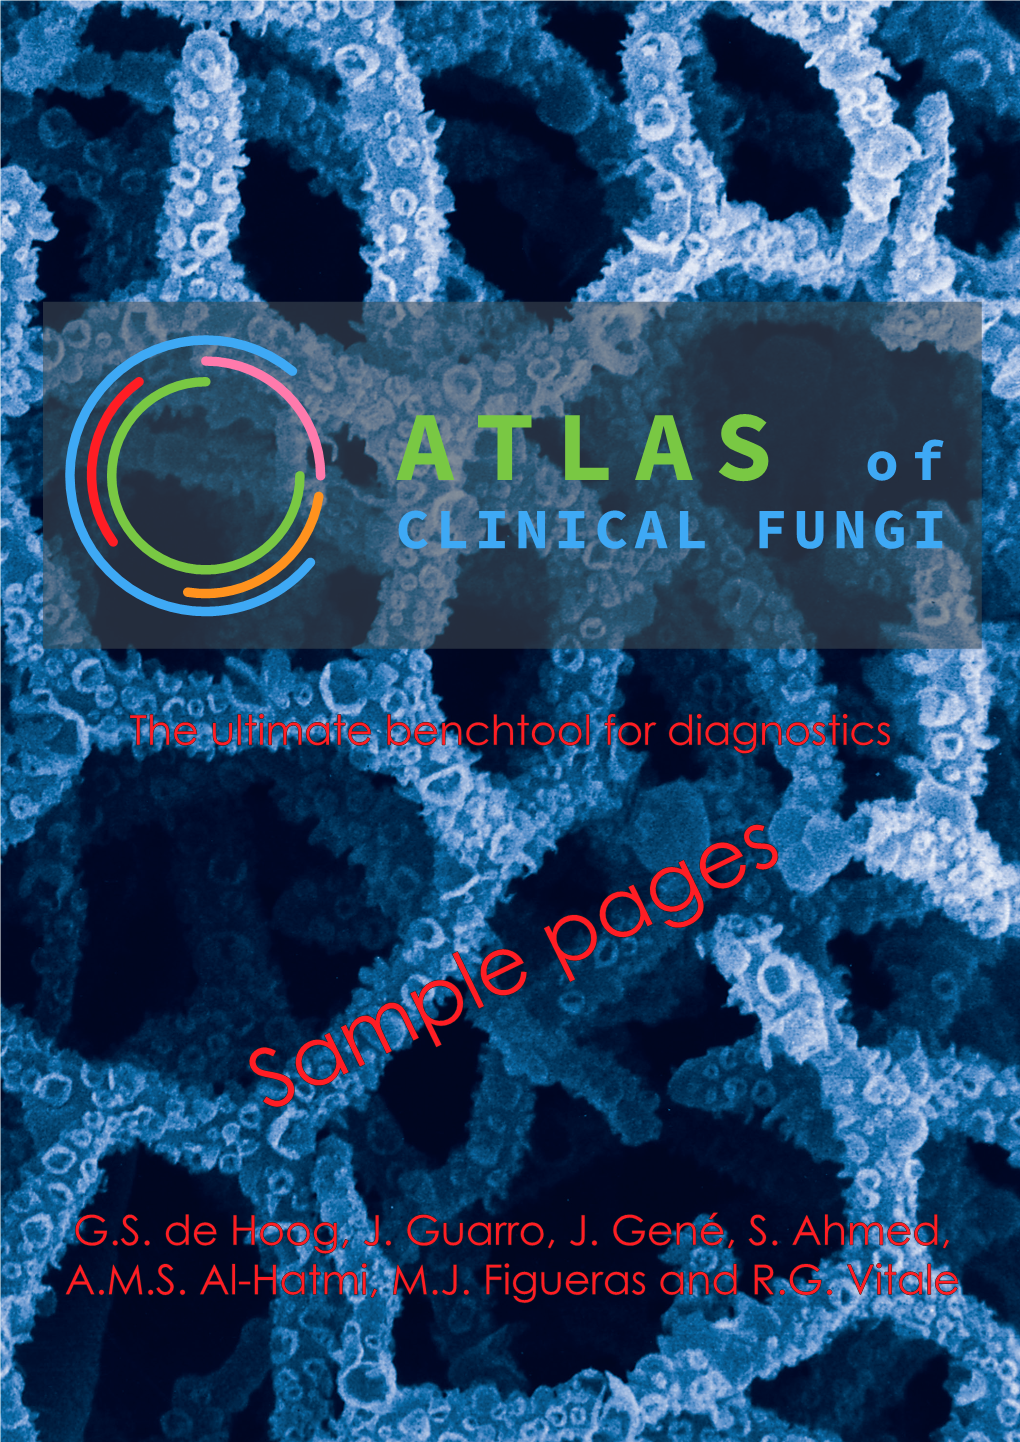 ATLAS Introduction CLINICAL FUNGI Introduction